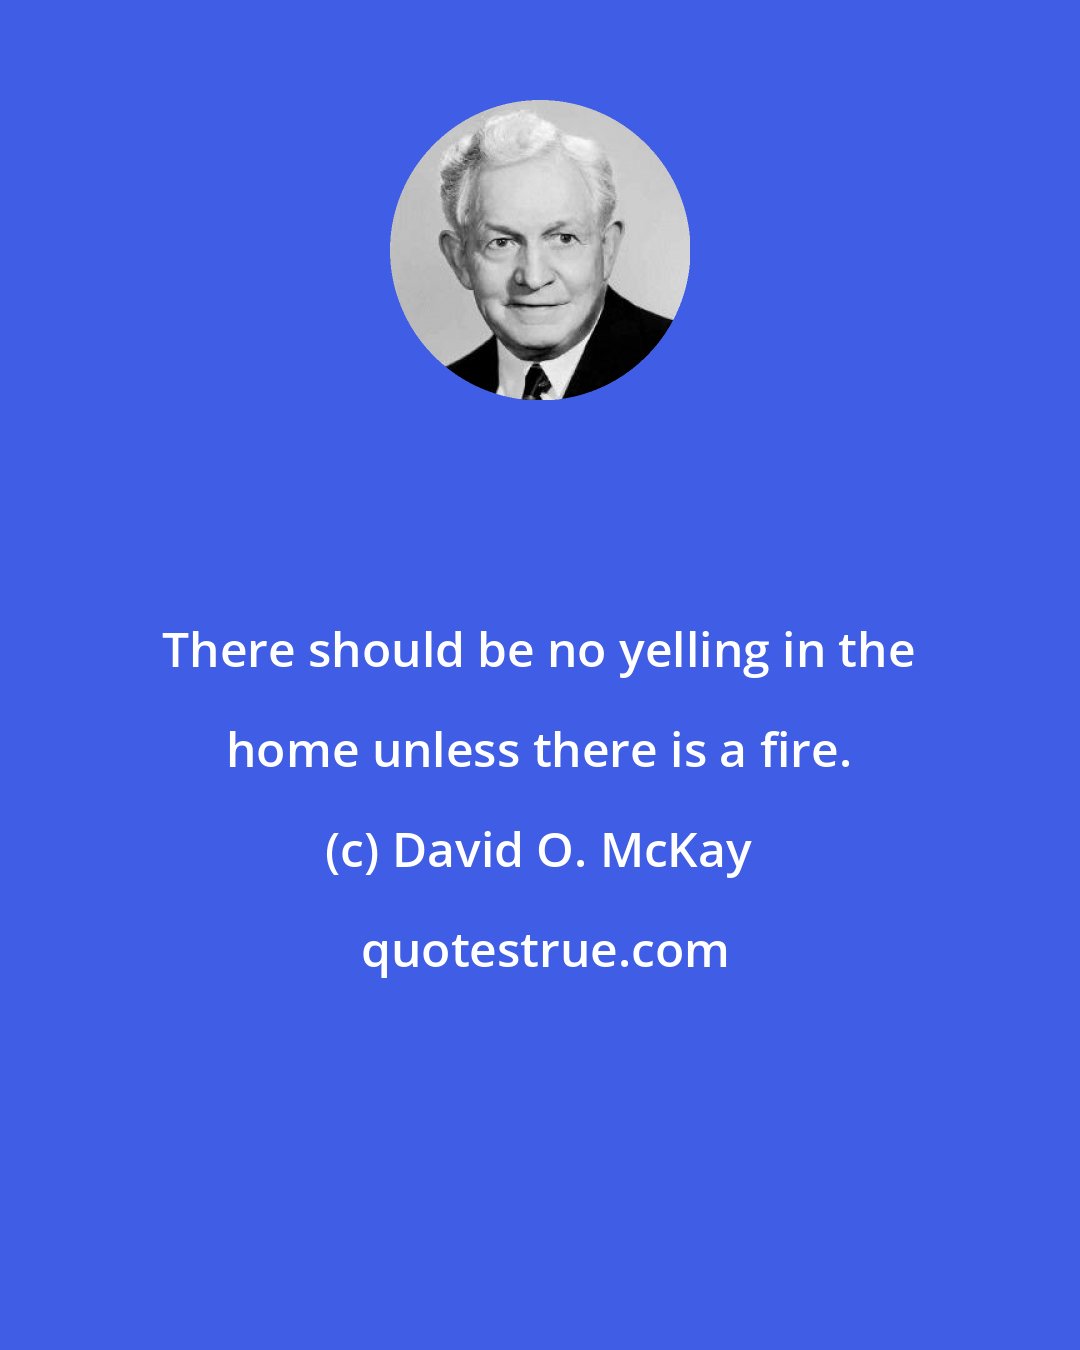 David O. McKay: There should be no yelling in the home unless there is a fire.